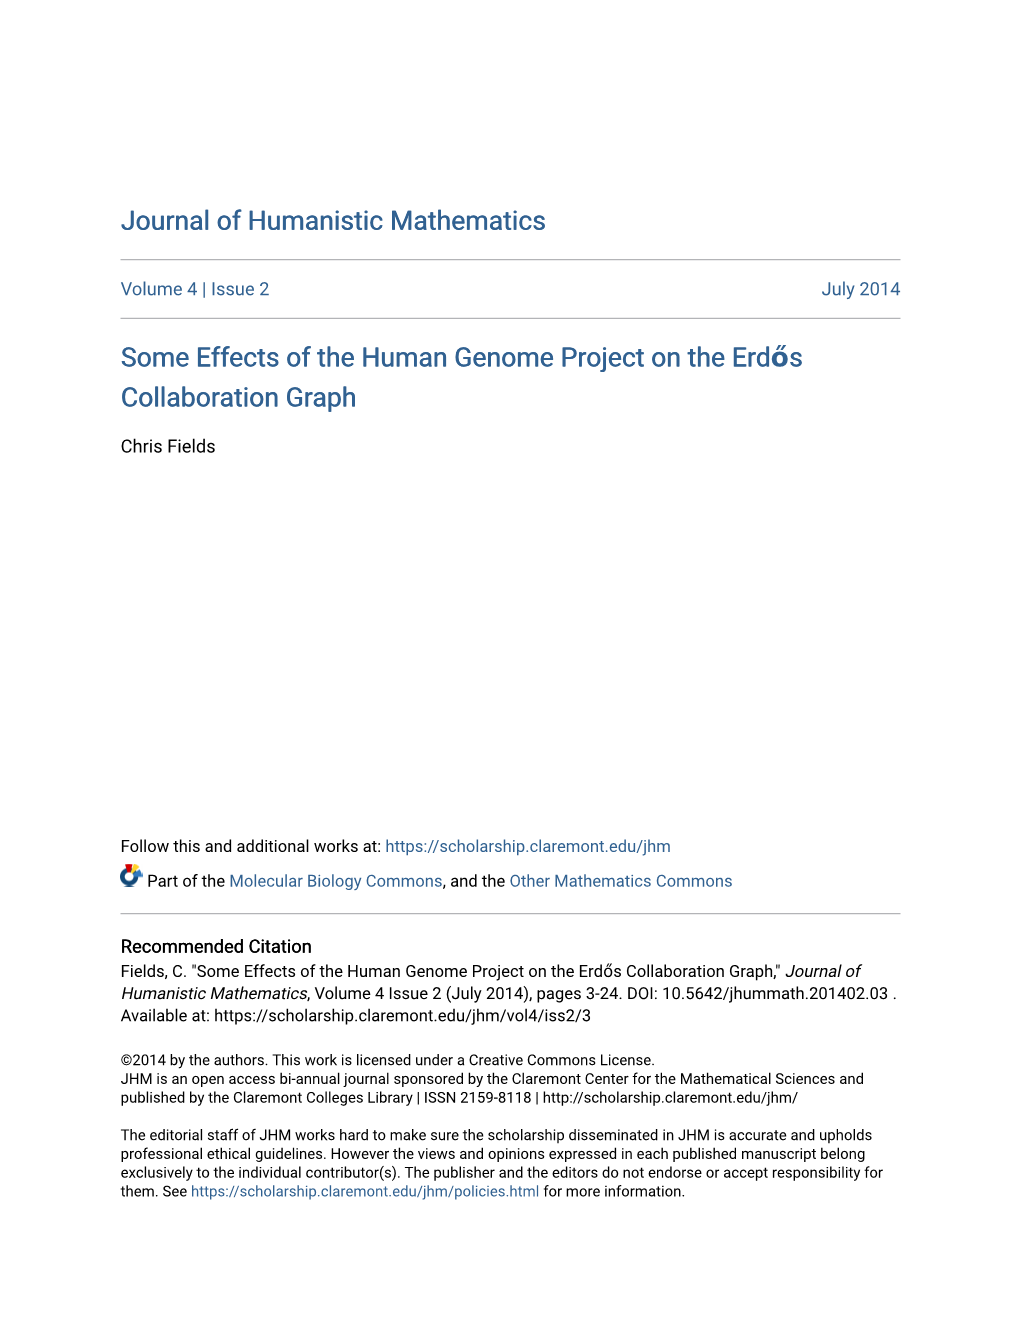 Some Effects of the Human Genome Project on the Erdős Collaboration Graph